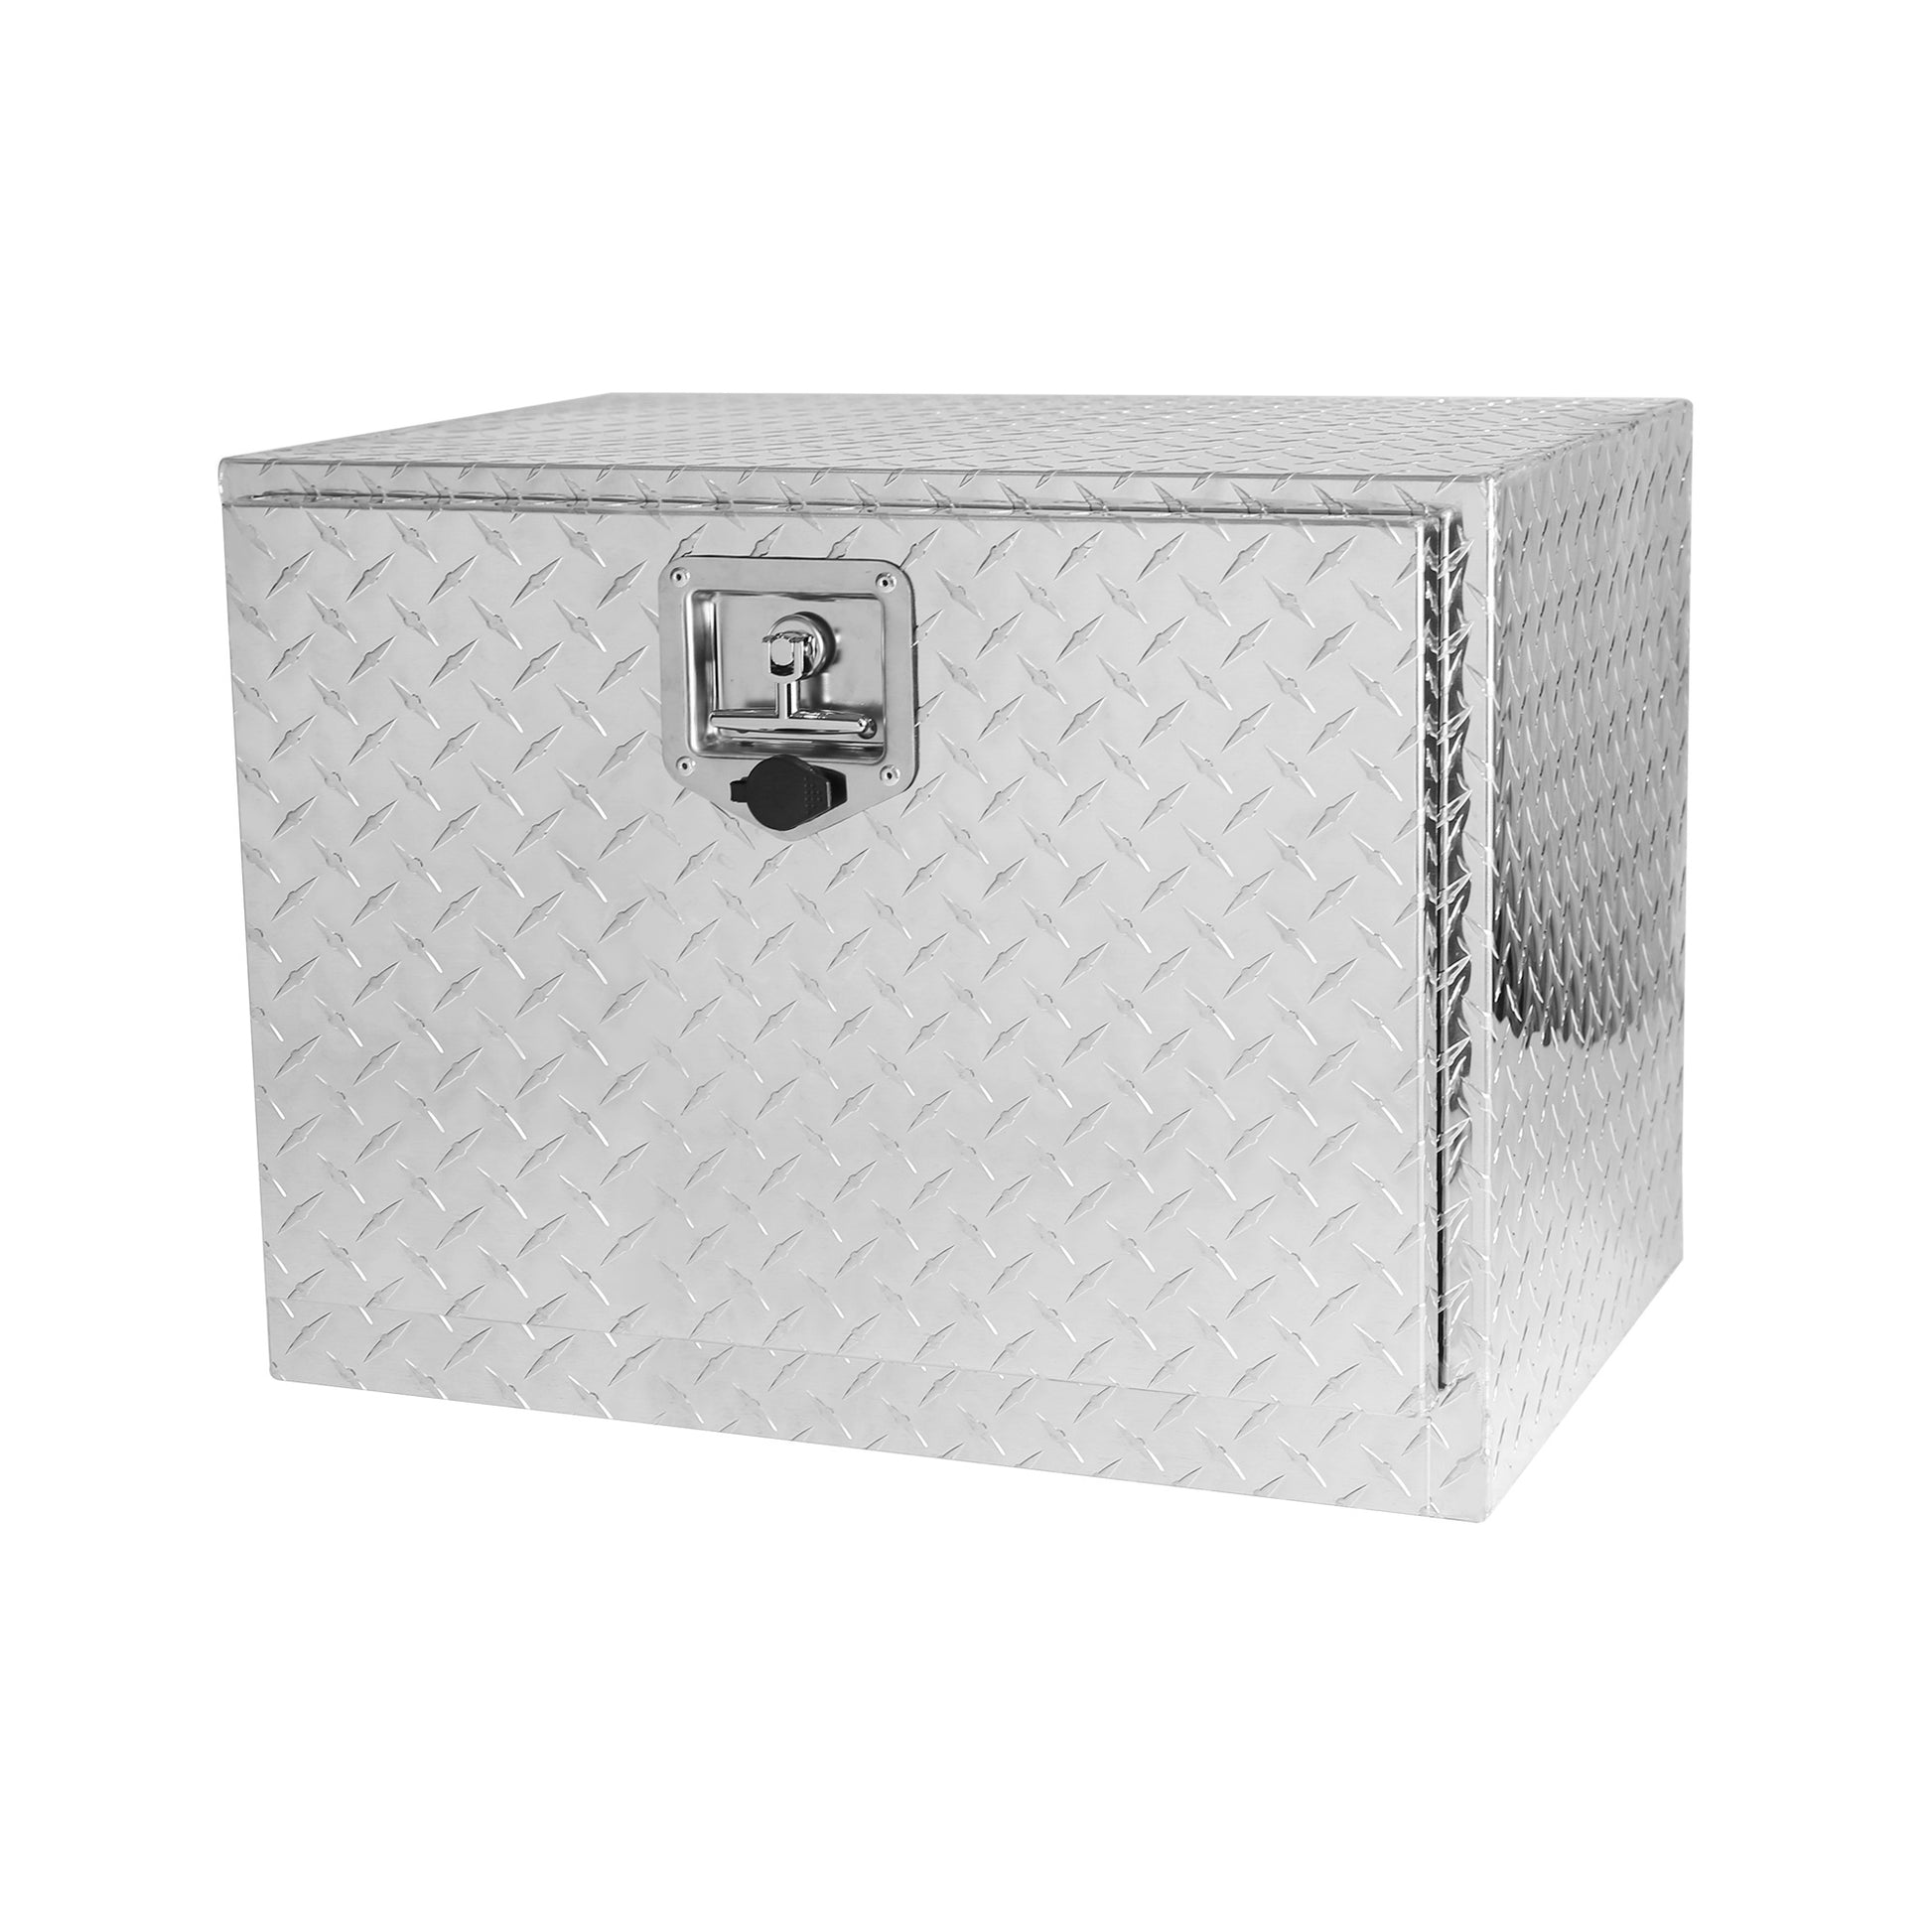 24 Inch Aluminum Stripes Plated Tool Box Pick Up Truck silver-aluminum